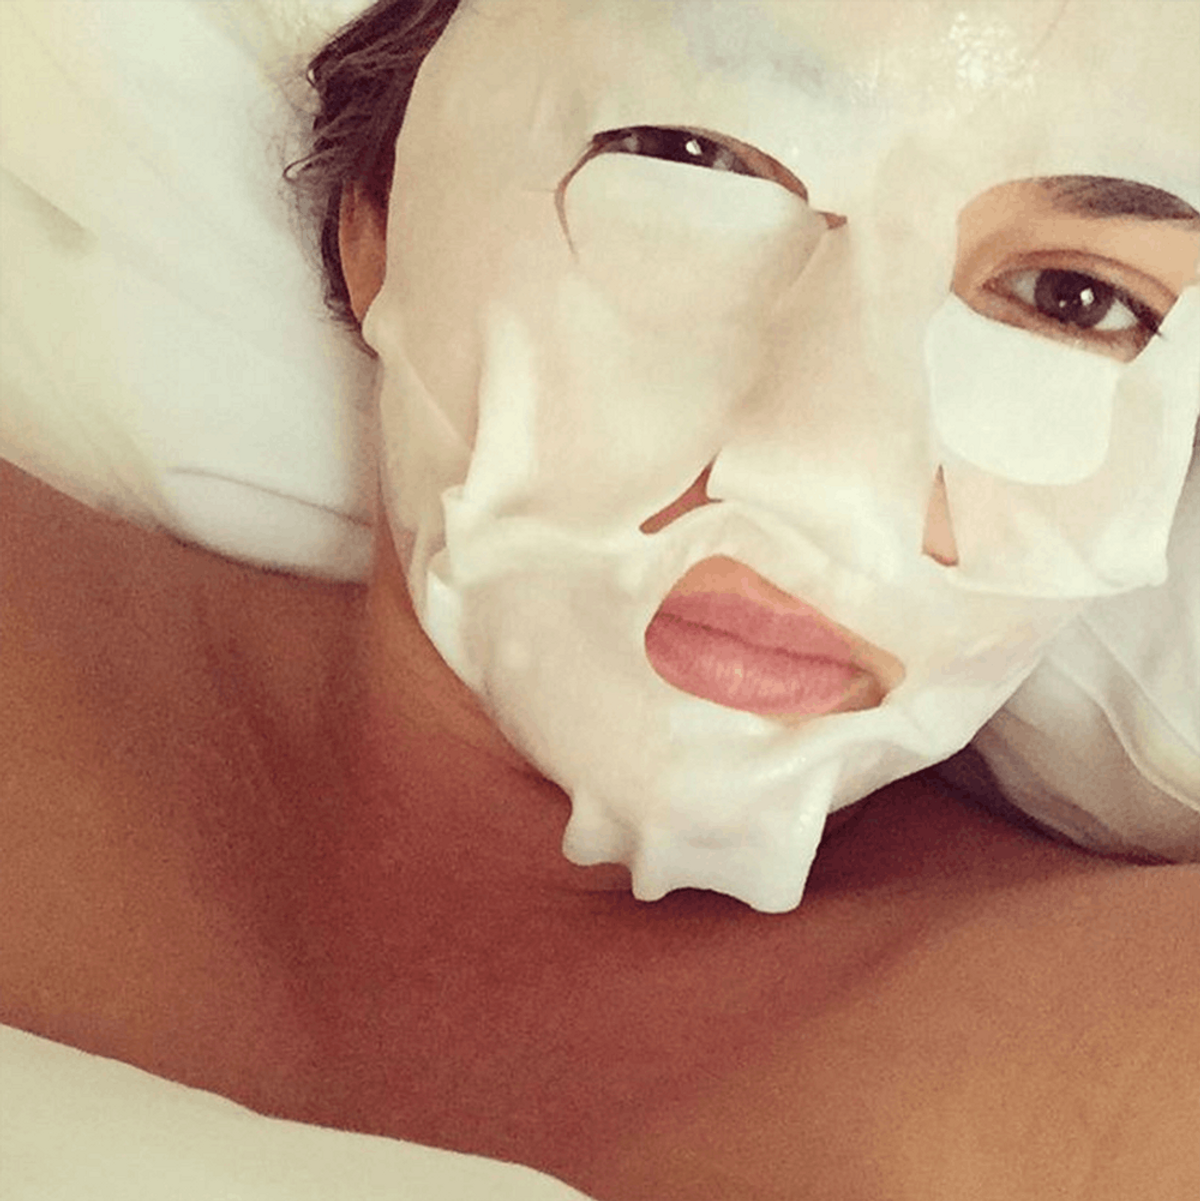 Here’s Some Gross News About Your K-Beauty Sheet Mask Obsession